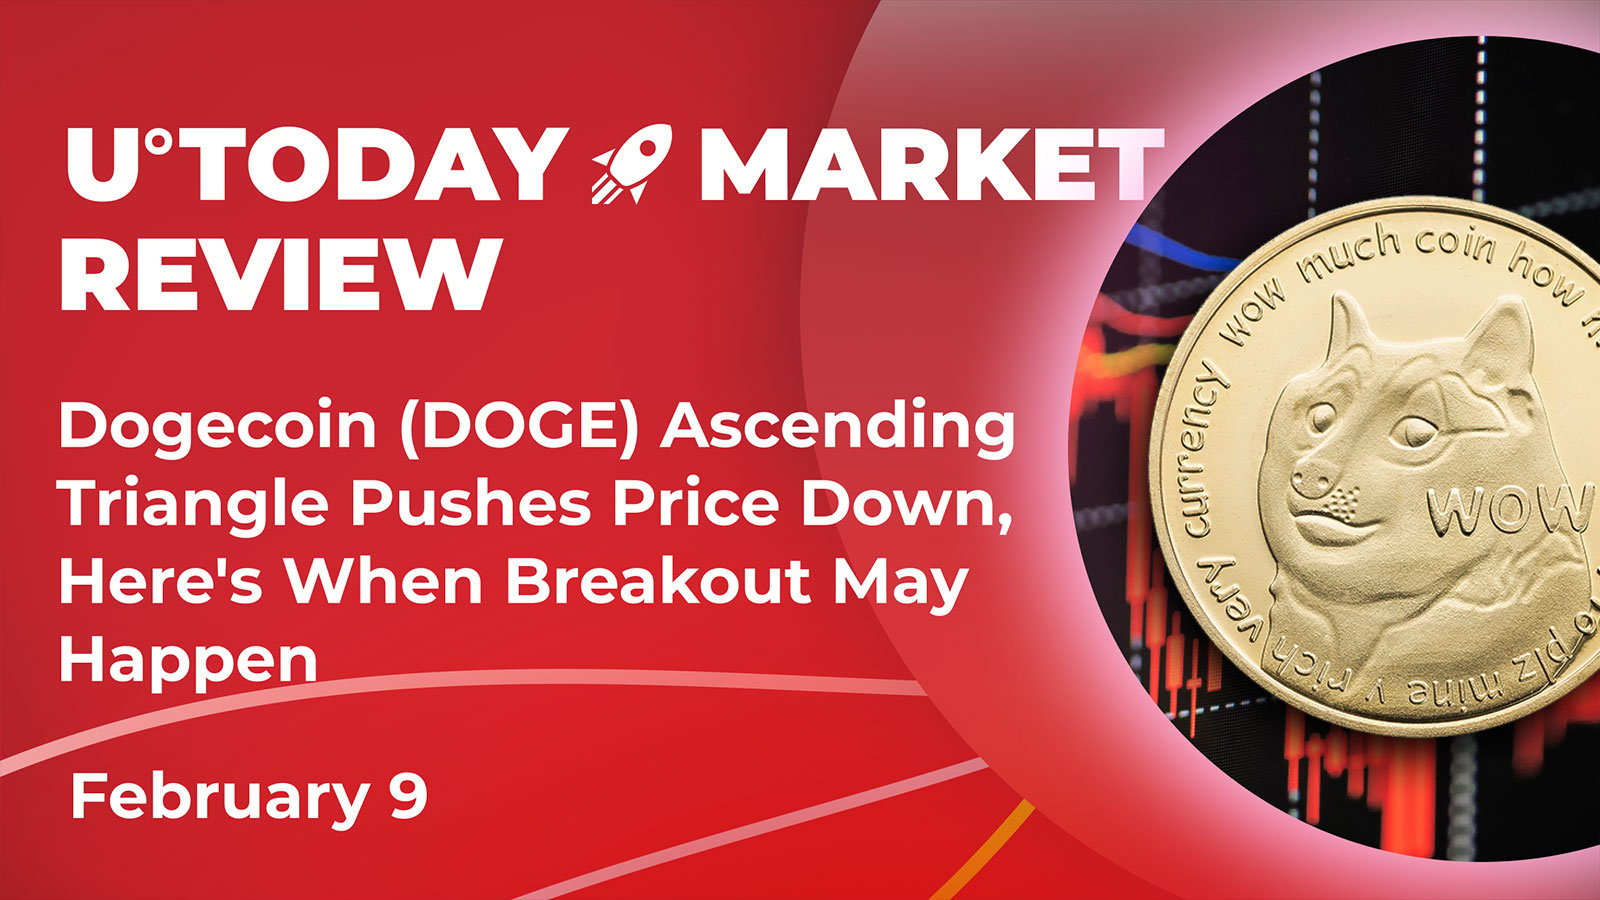 Dogecoin (DOGE) Ascending Triangle Pushes Price Down, Here’s When Breakout May Happen